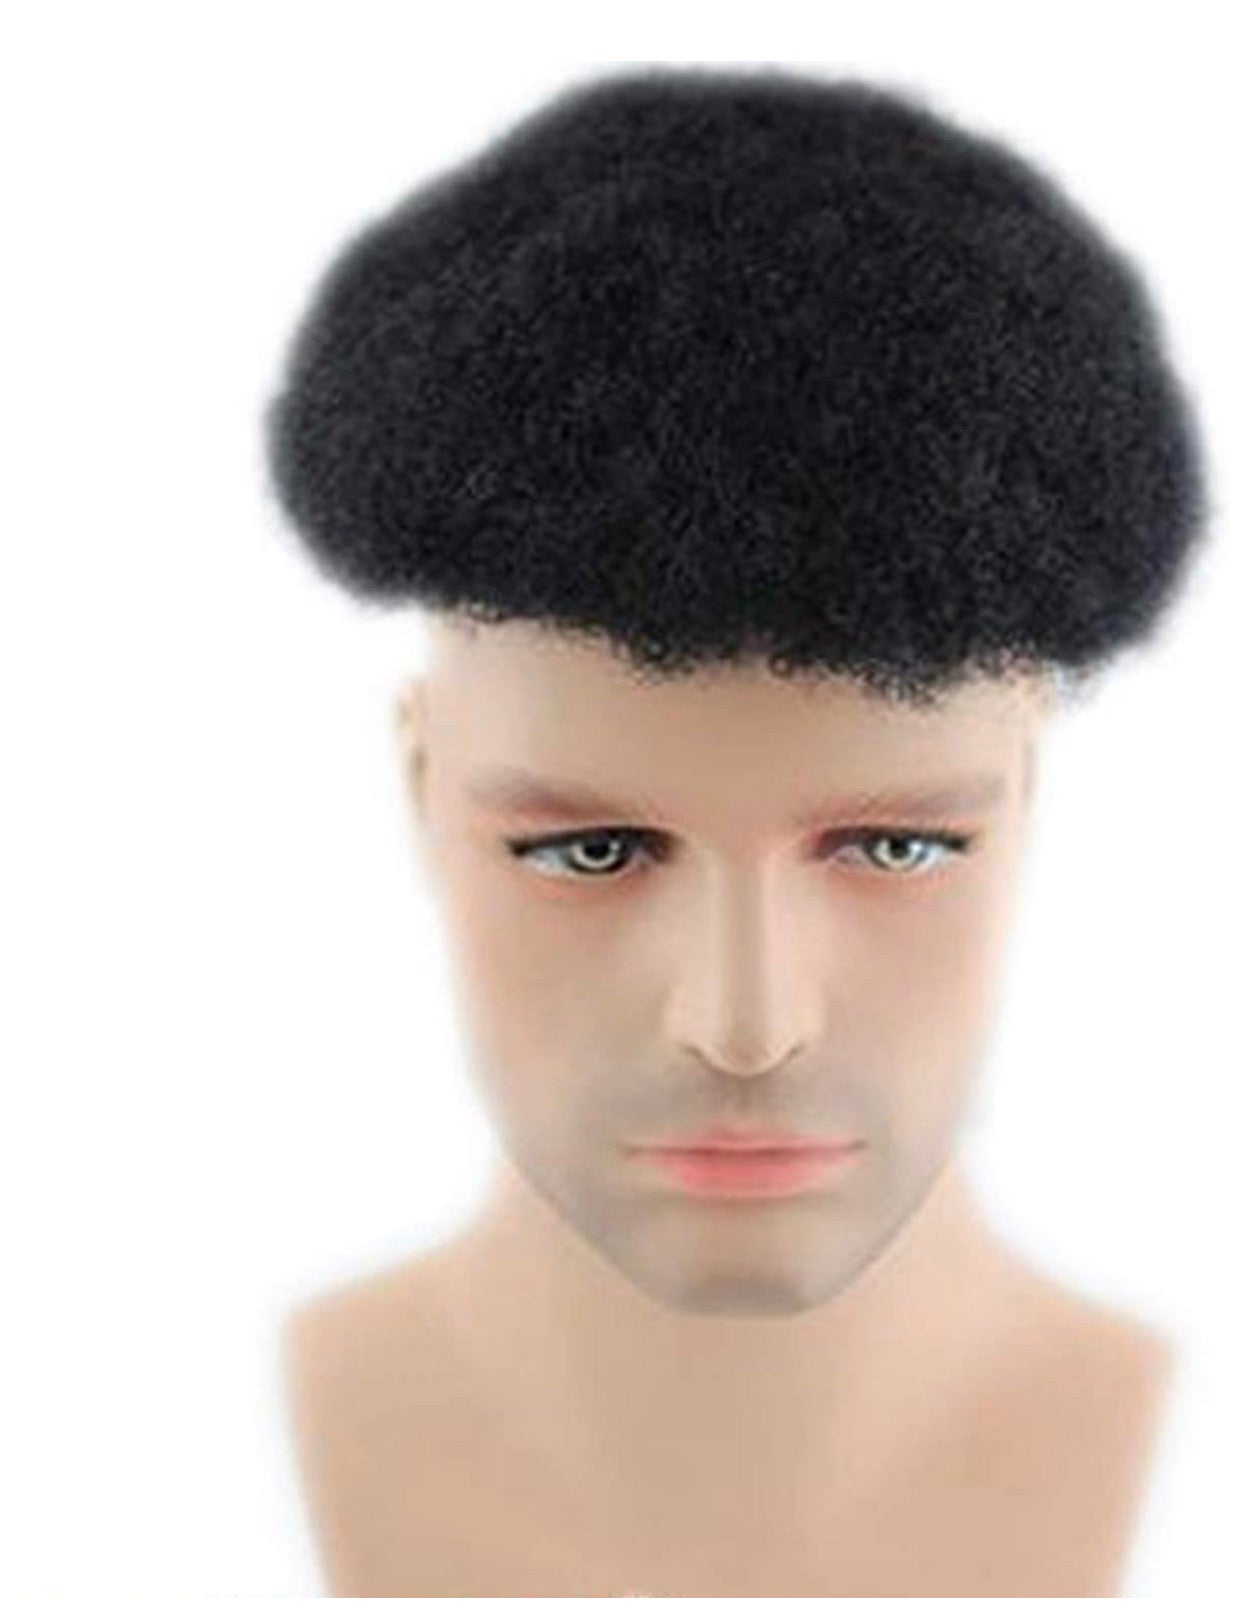 Custom Fitting Afro Hair Replacement System For Men $800.00